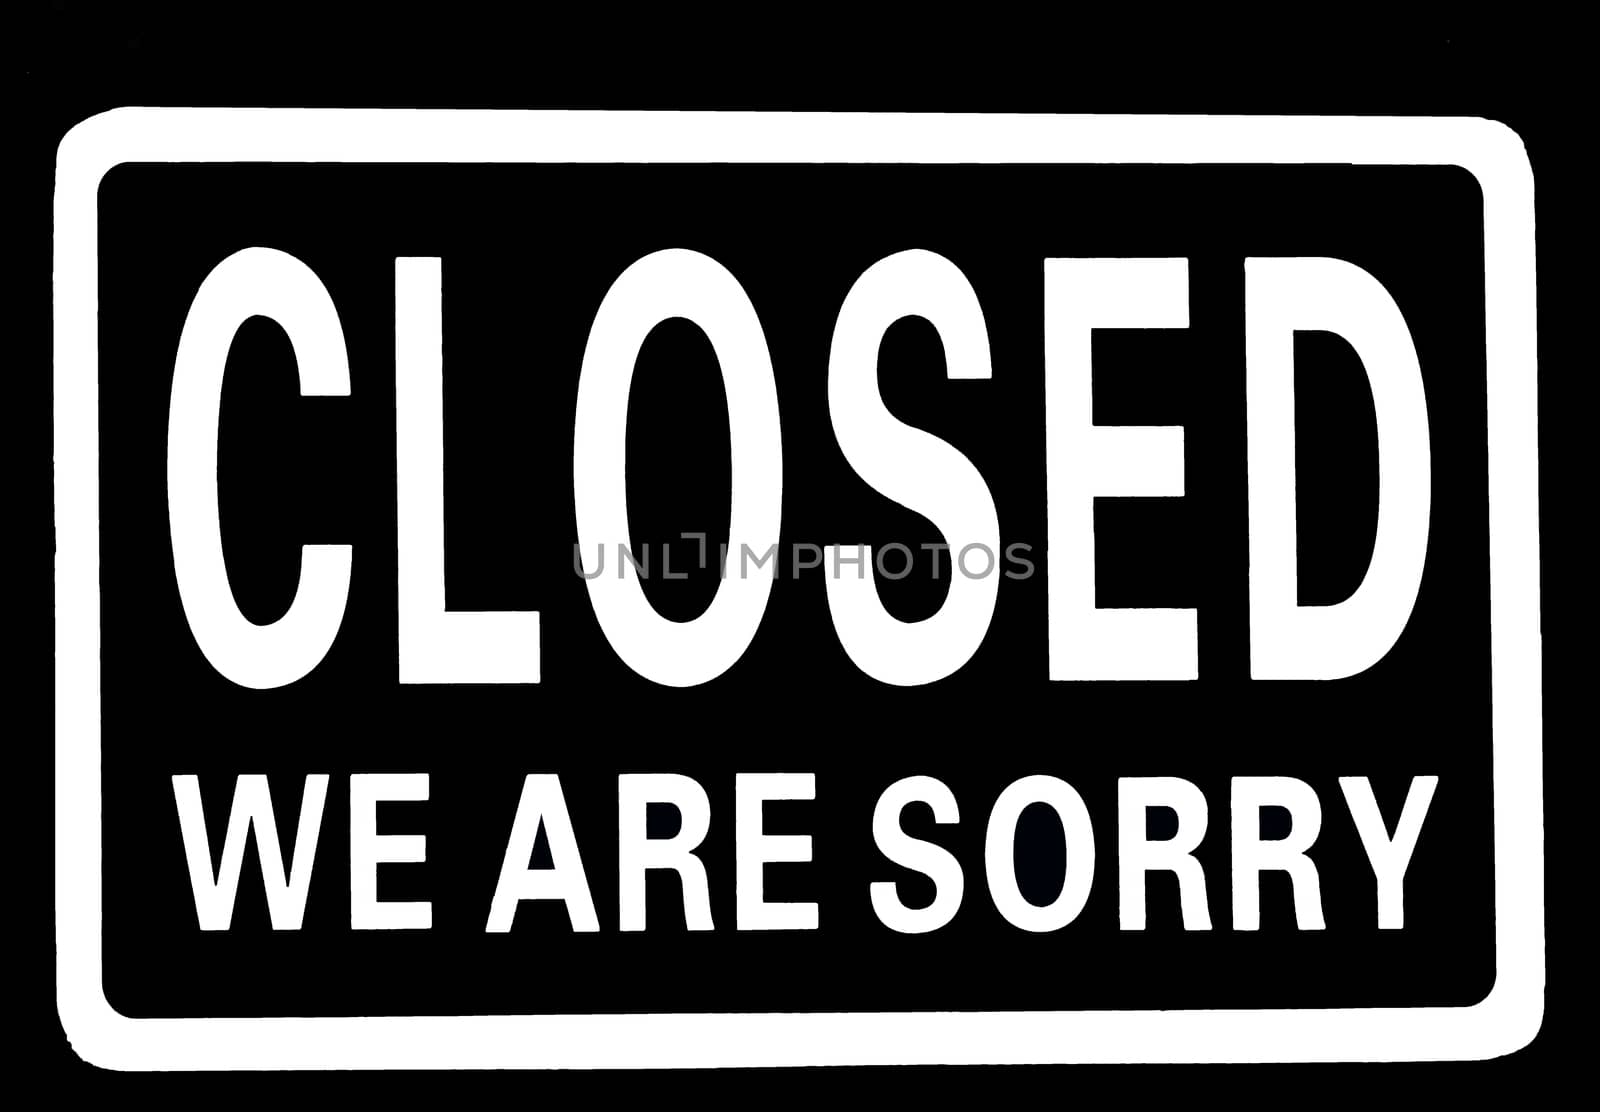 Closed we are sorry by Fr@nk